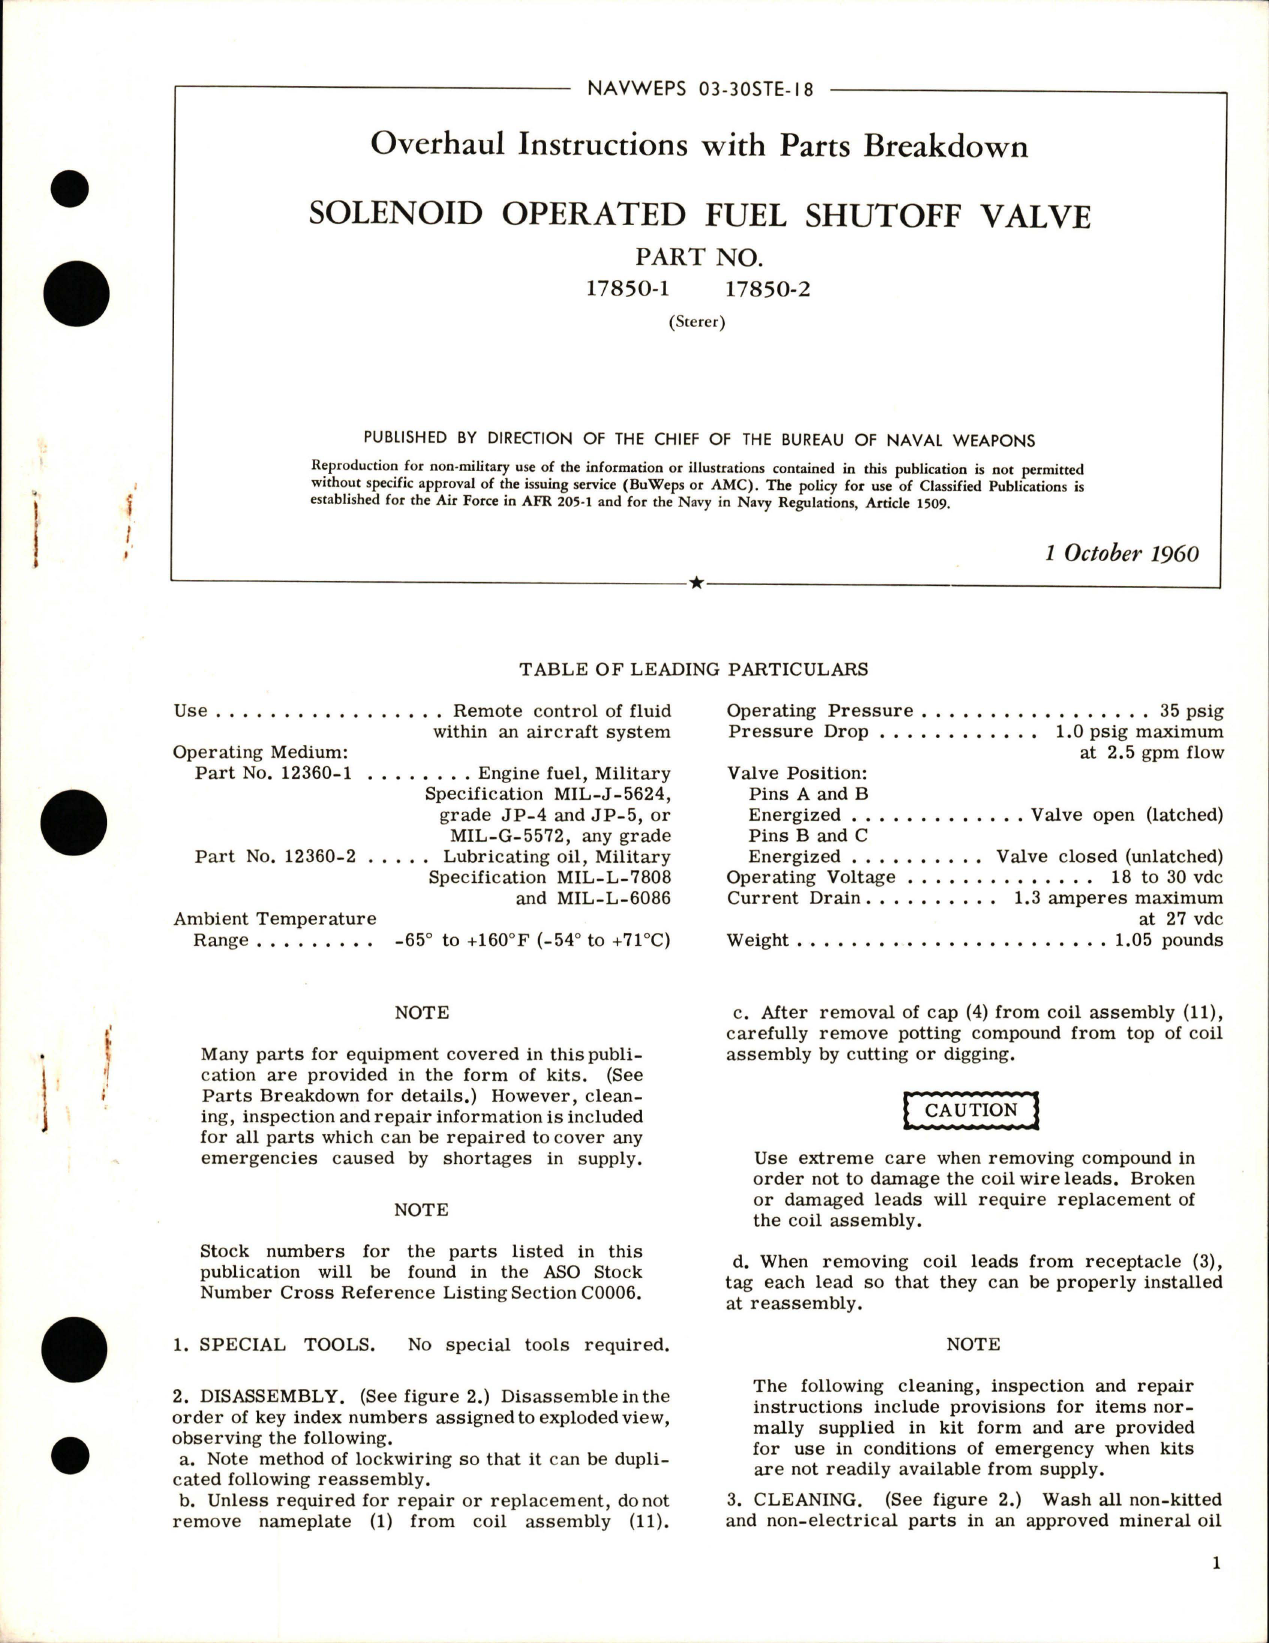 Sample page 1 from AirCorps Library document: Overhaul Instructions with Parts Breakdown for Solenoid Operated Fuel Shutoff Valve - Part 17850-1 and 17850-2